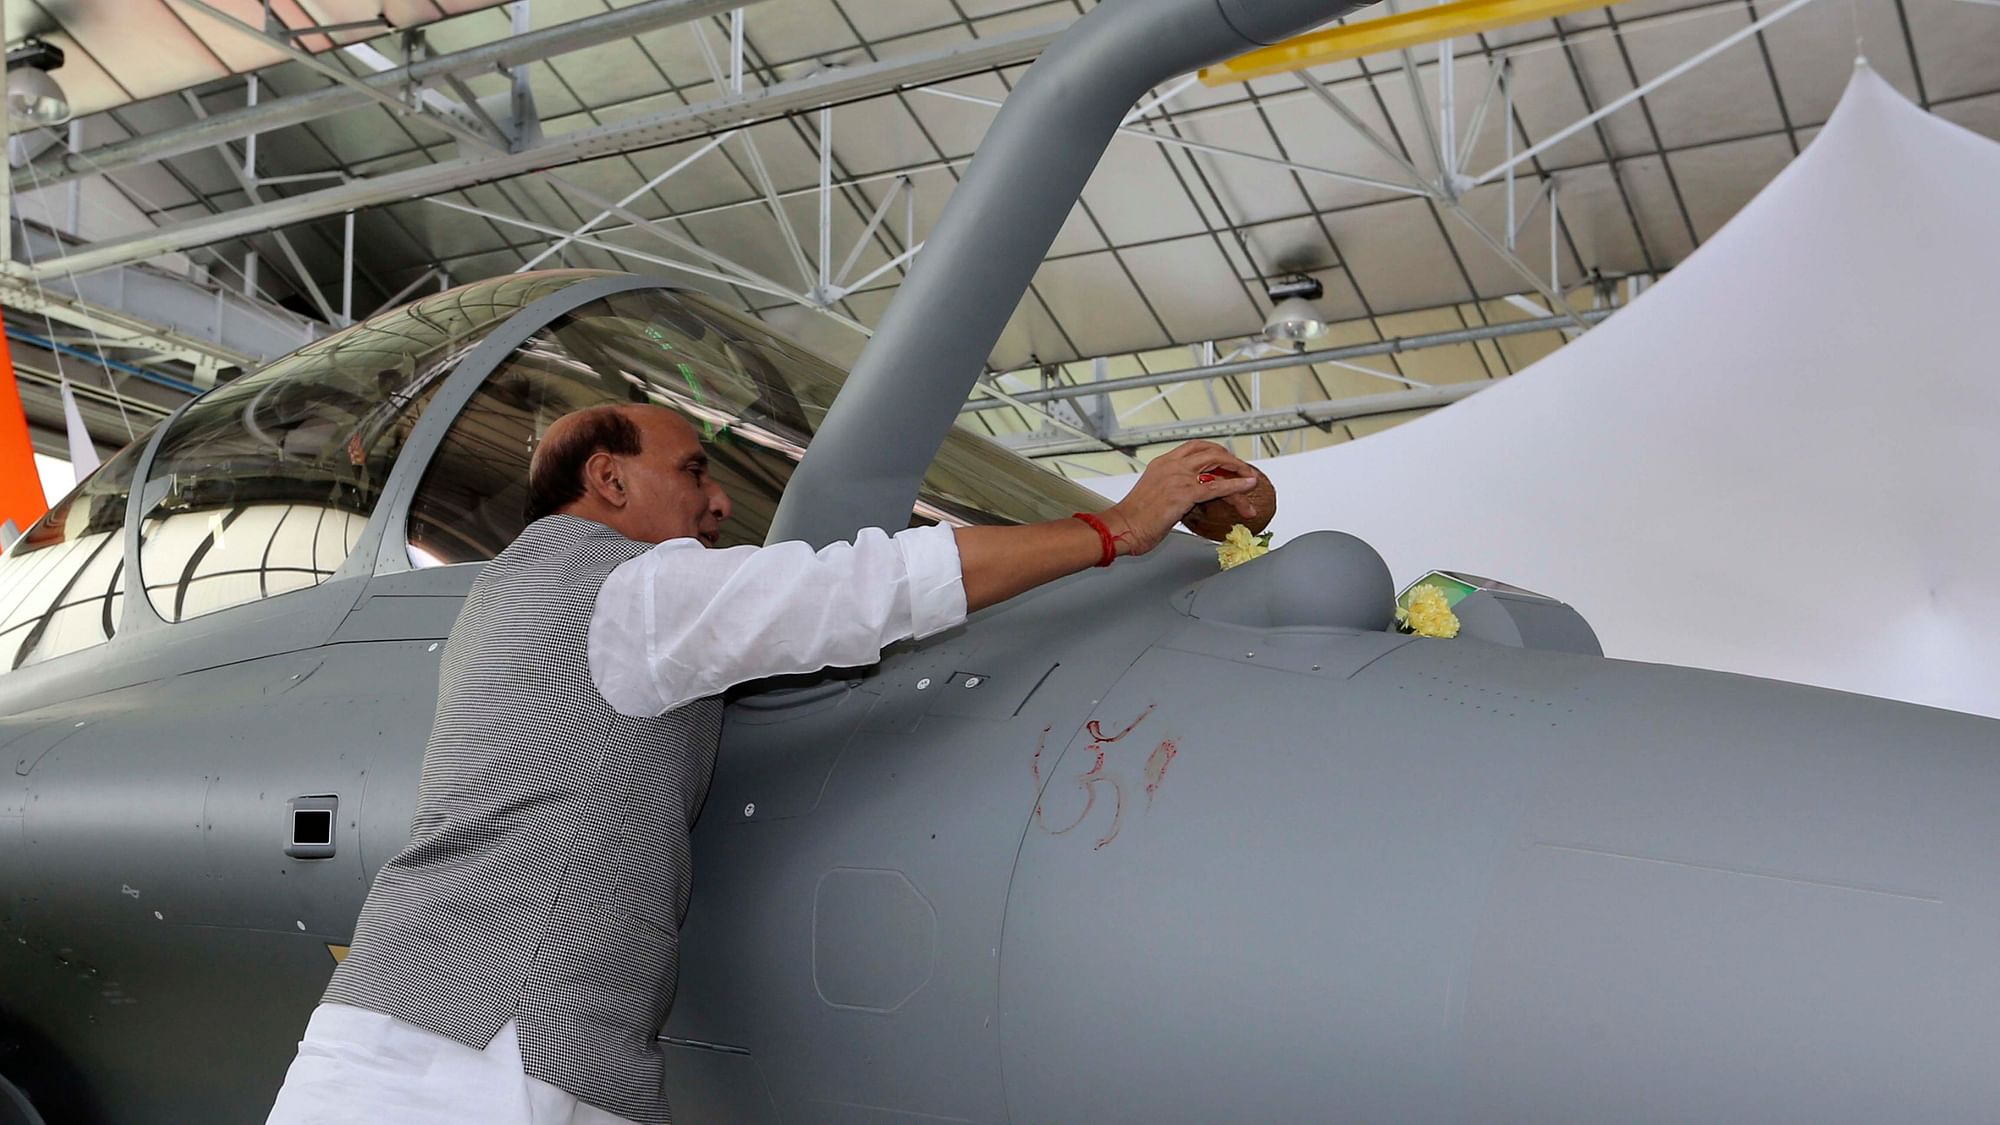 Defense Minister Rajnath Singh put some flowers as a ritual gesture on a Rafale jet fighter during an handover cermony at the Dassault Aviation plant in Merignac, near Bordeaux, southwestern France, on 8 October.